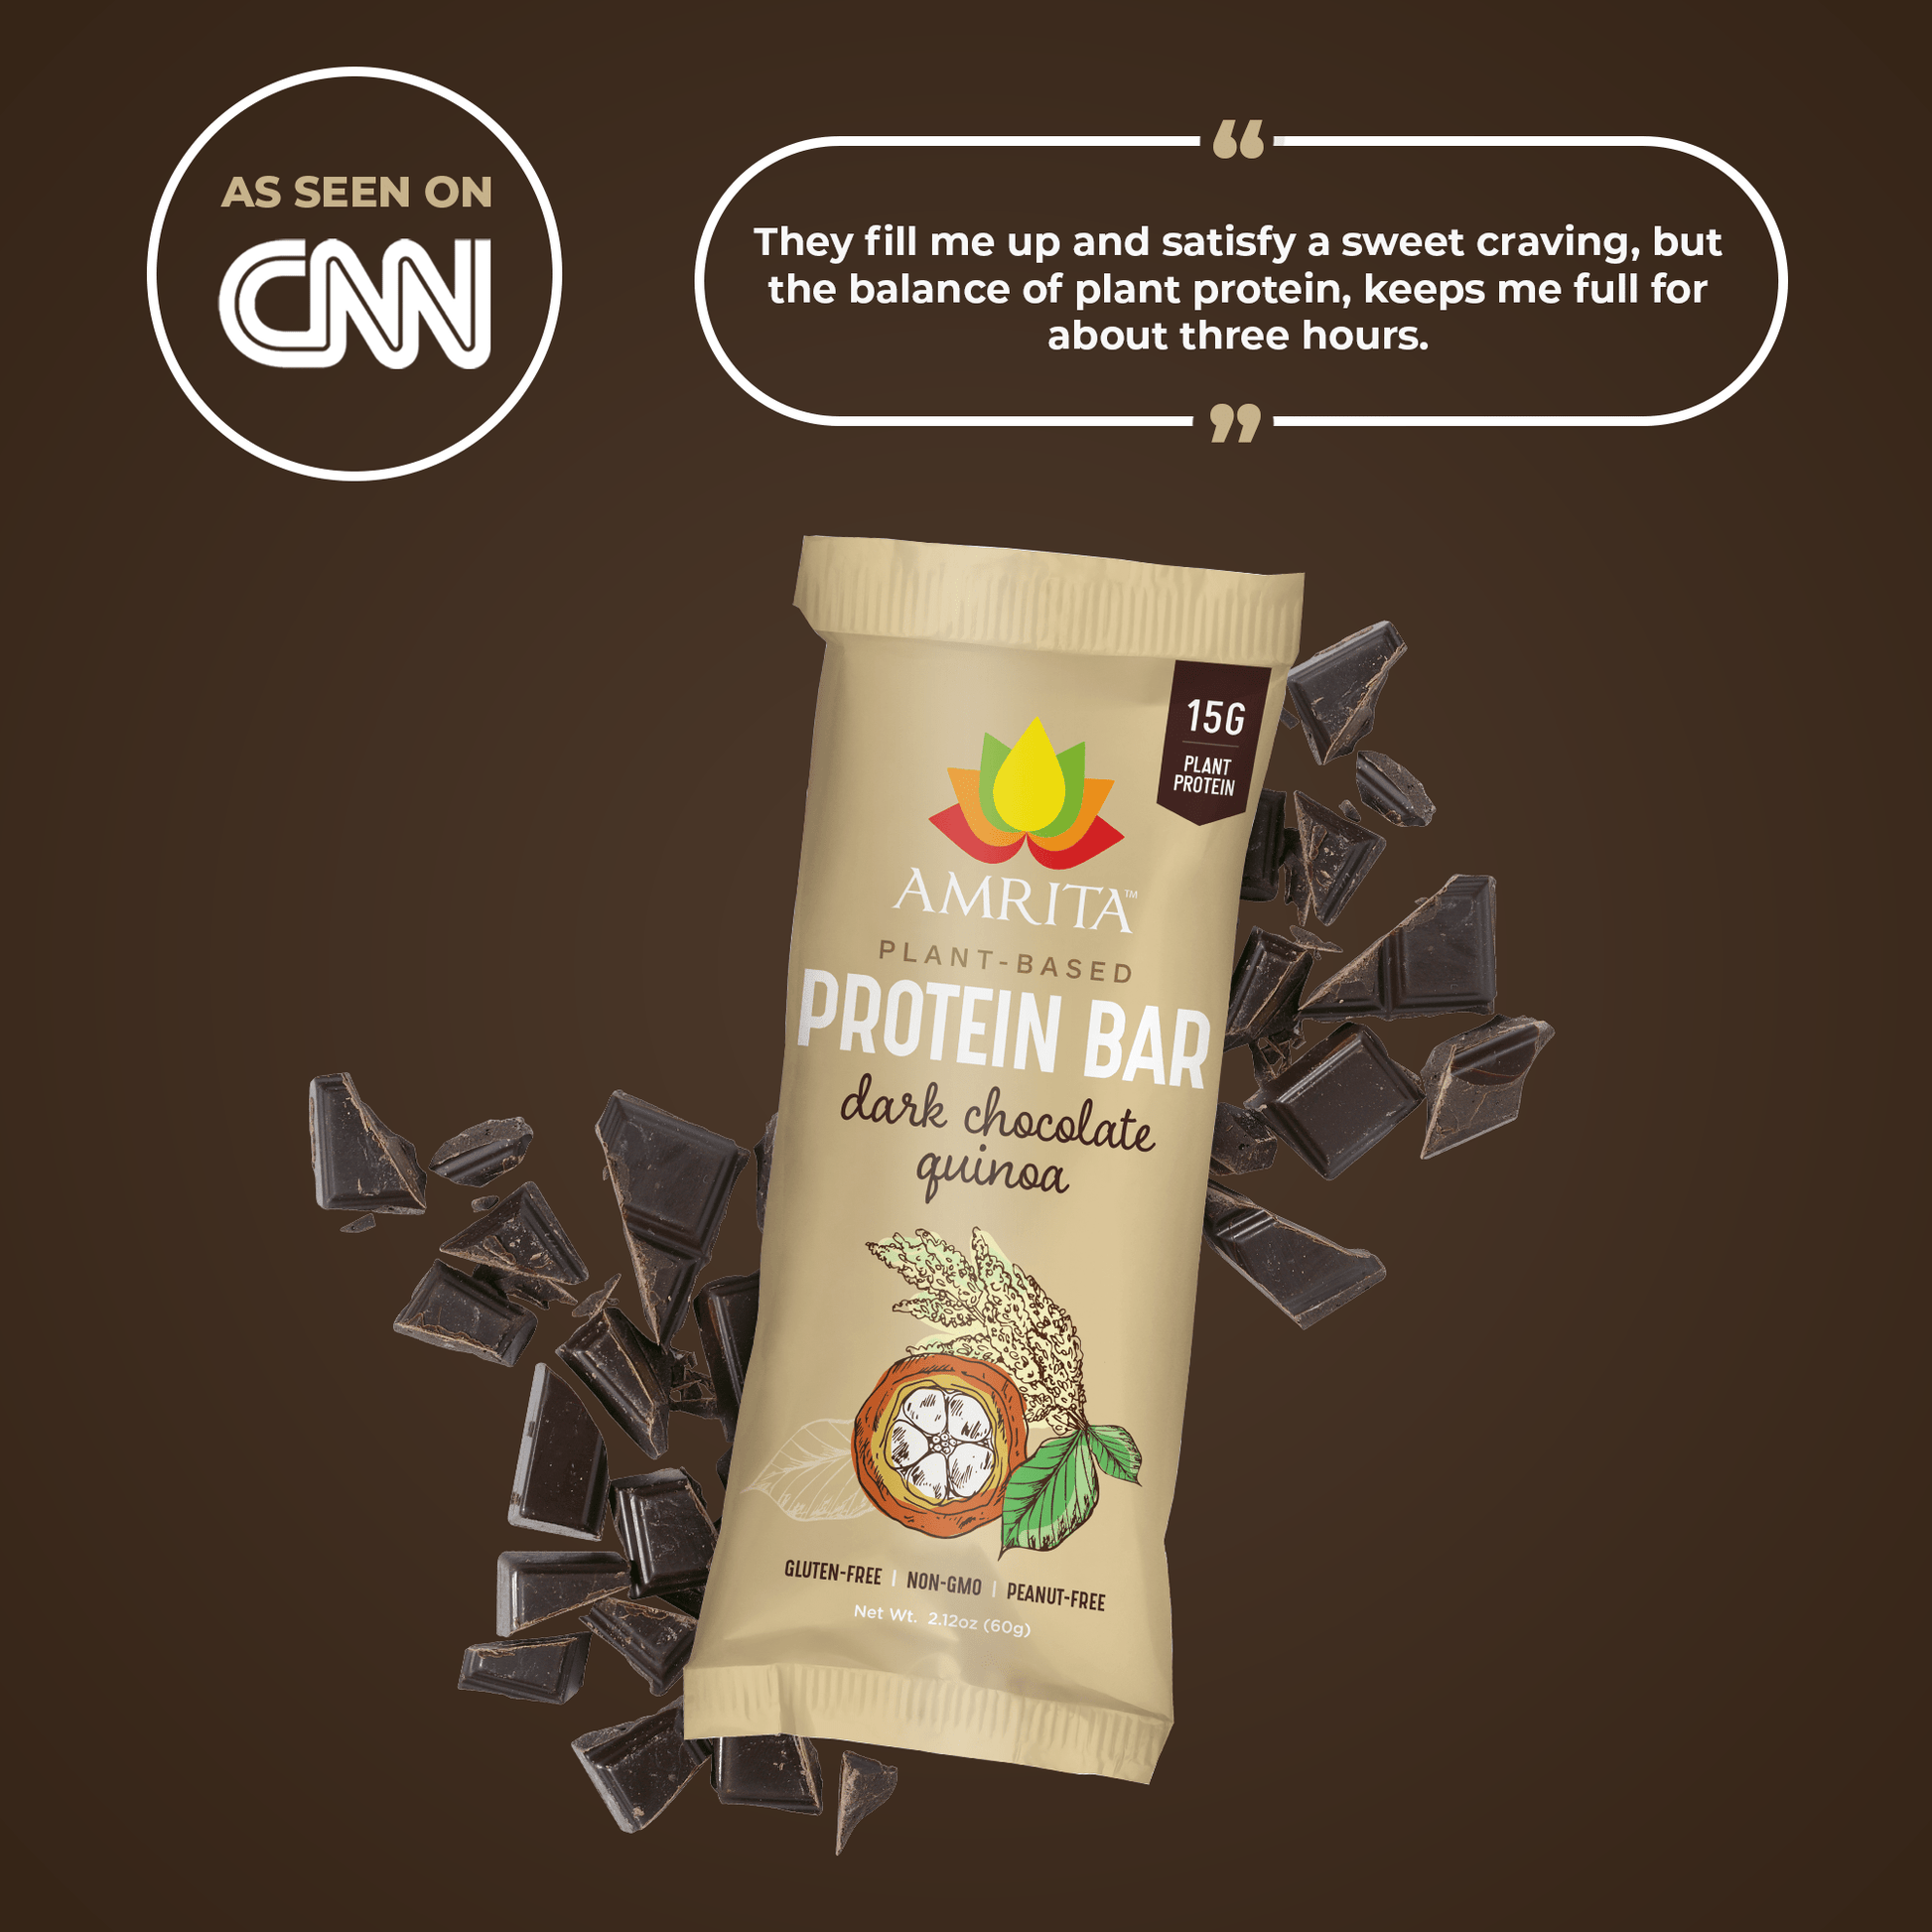 Dark Chocolate Quinoa High Protein Bars Customer Review - They fill me up and satisfy a sweet craving, but the balance of plant protein keeps me full for about three hours